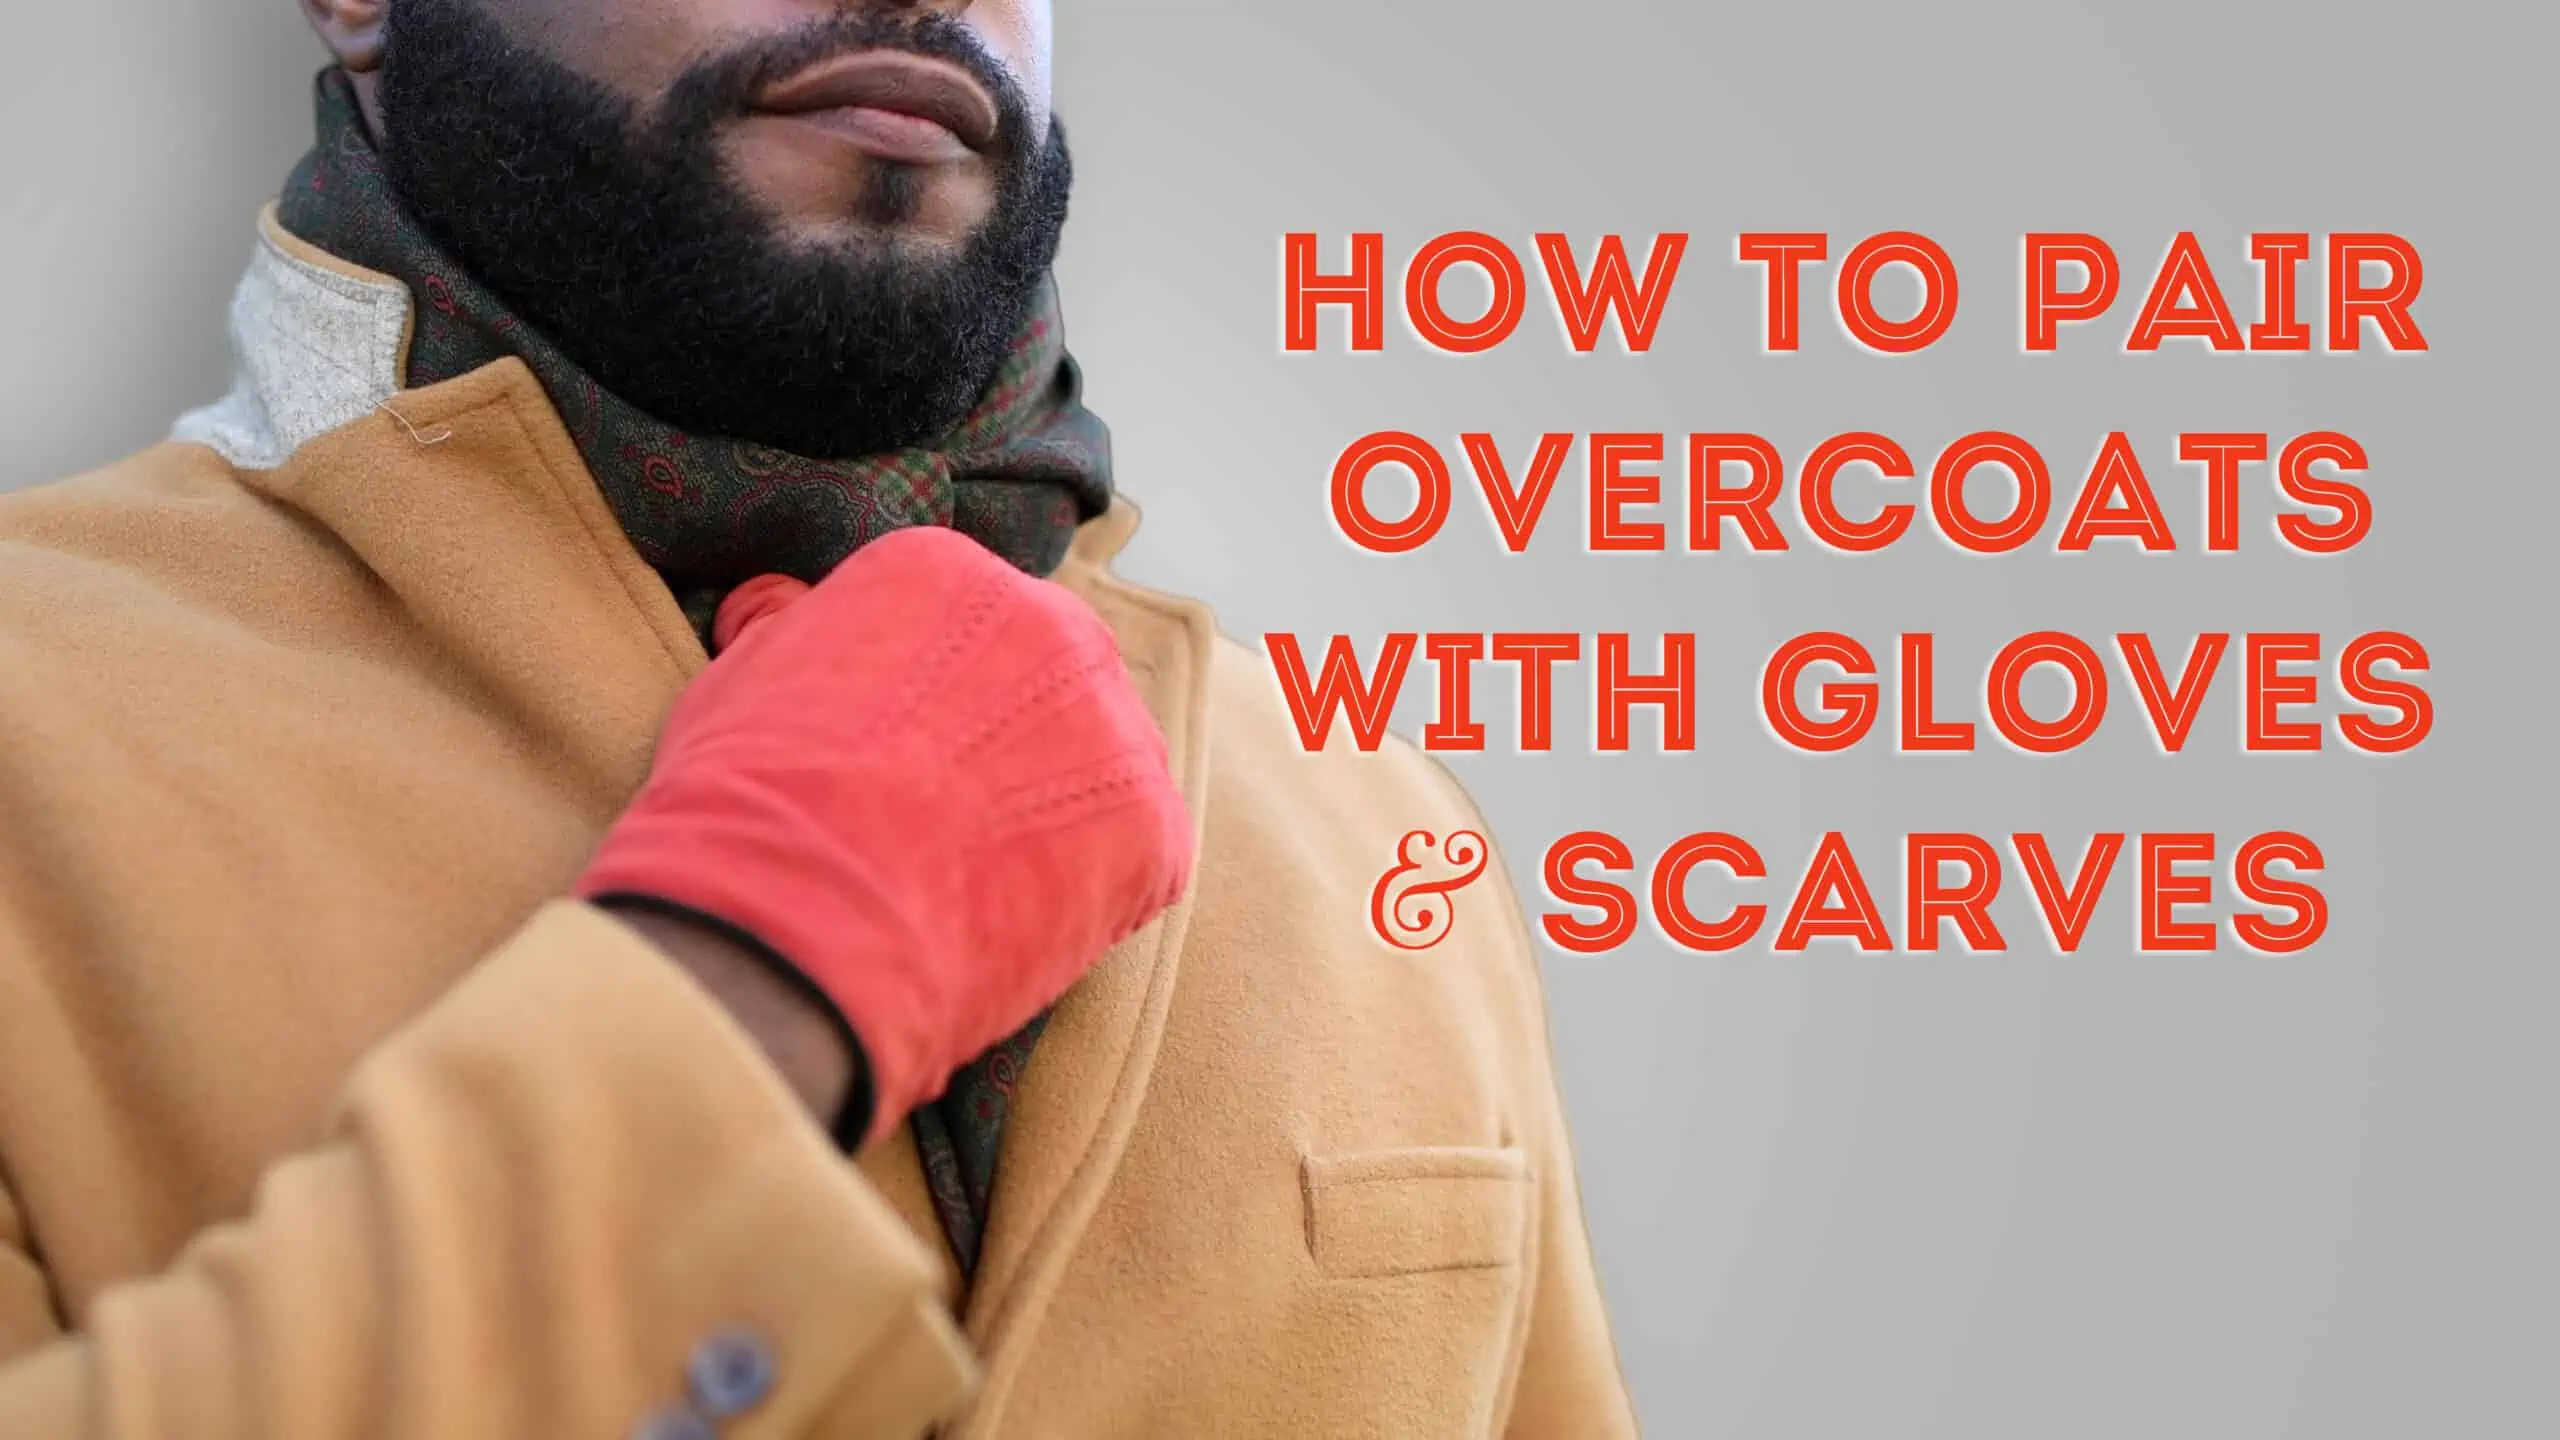 how to pair overcoats with gloves scarves 3840x2160 scaled